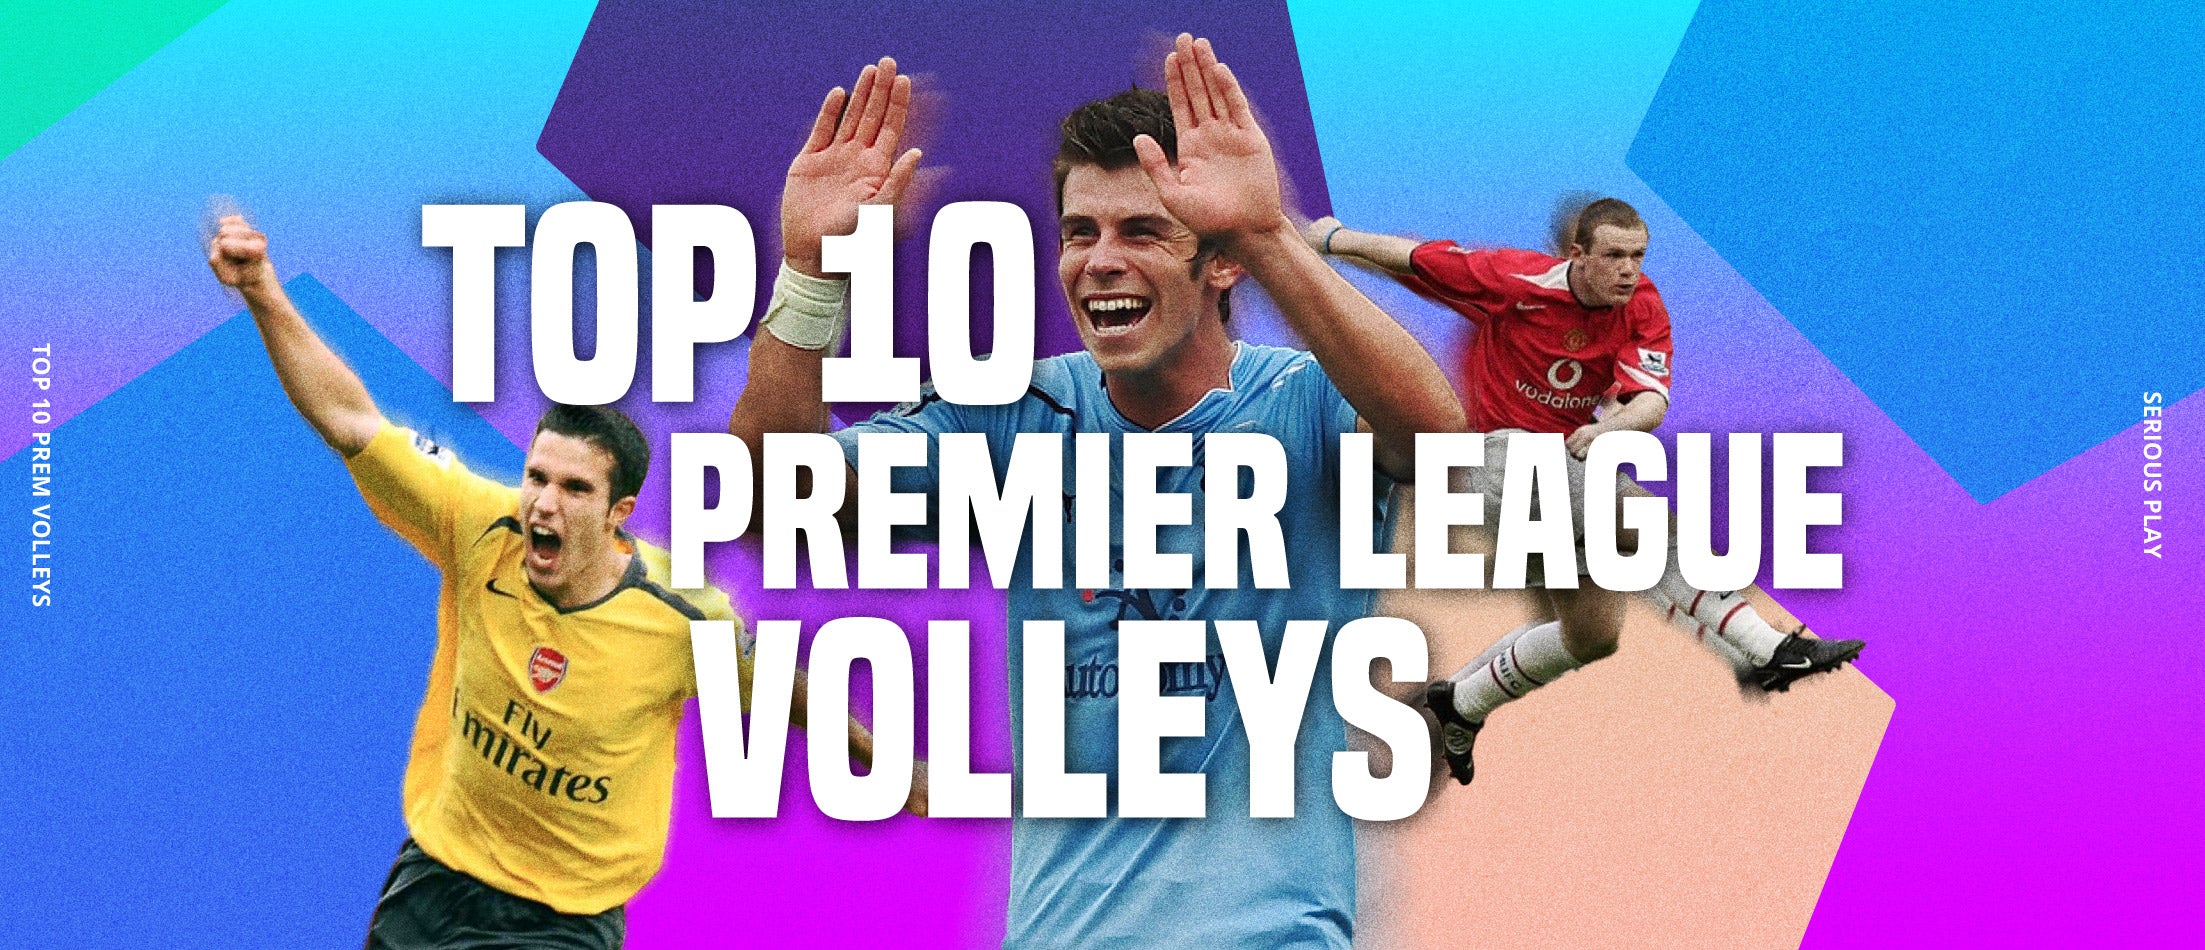 Top 10 Premier league volleys of all time!